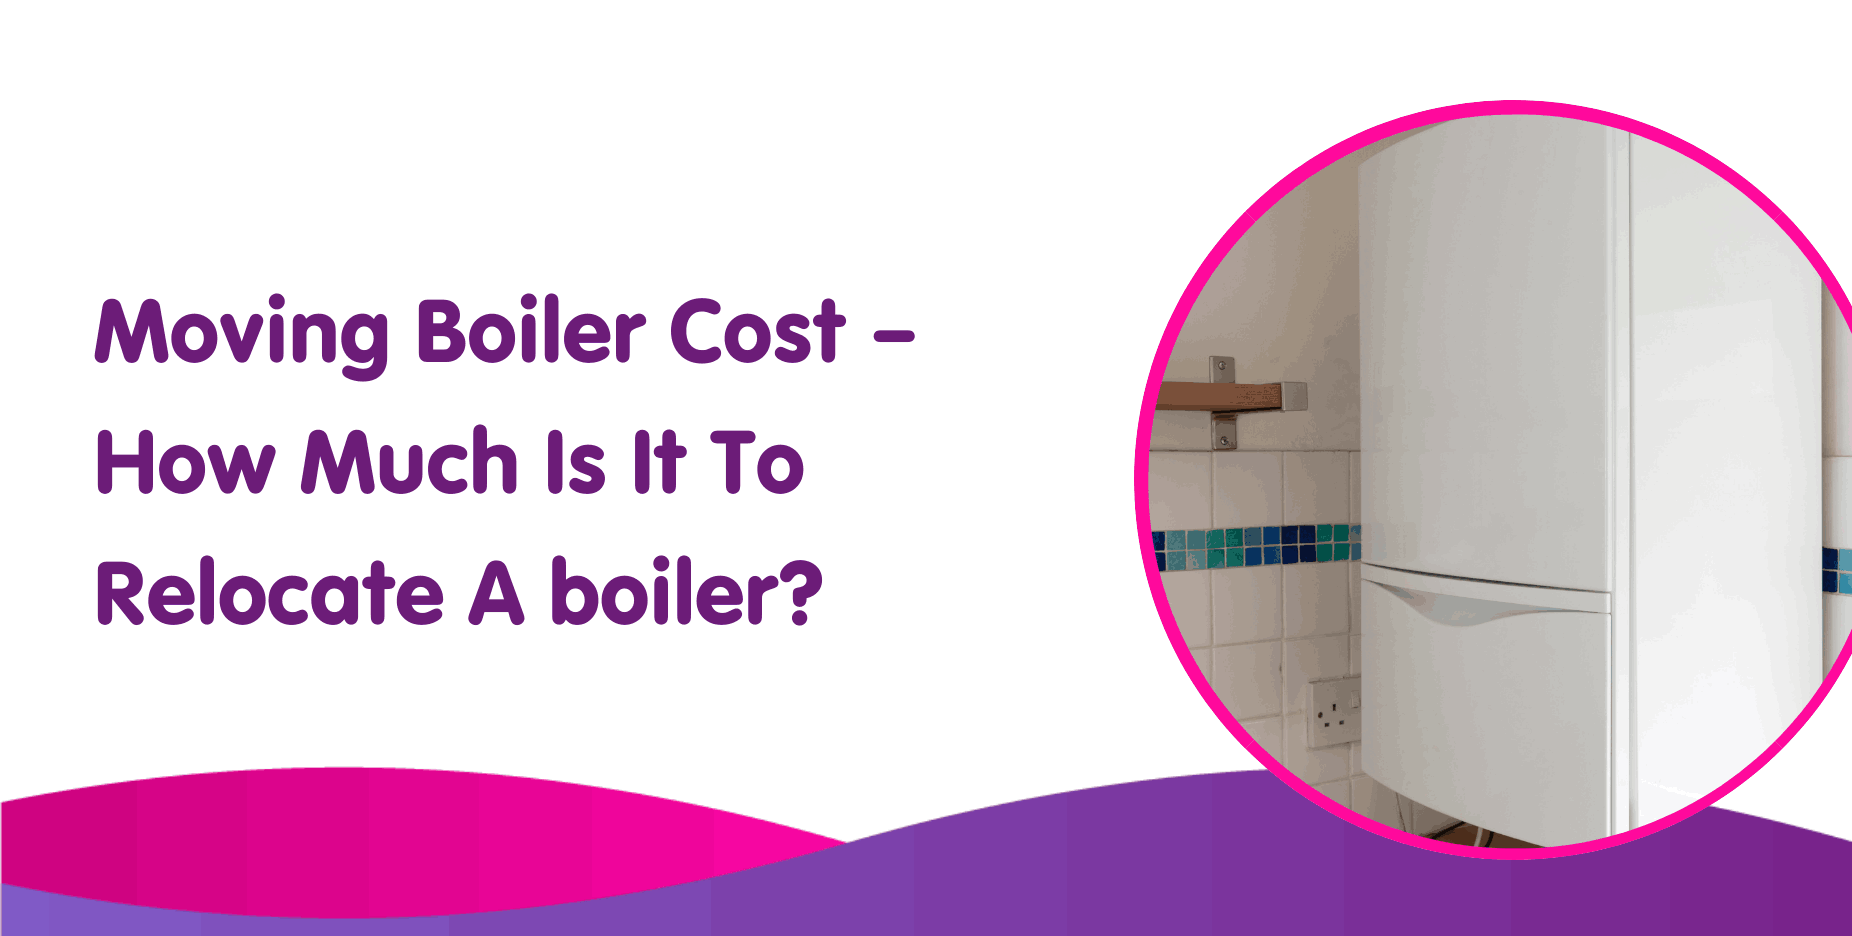 Moving Boiler Cost – How Much Is It To Relocate A boiler?